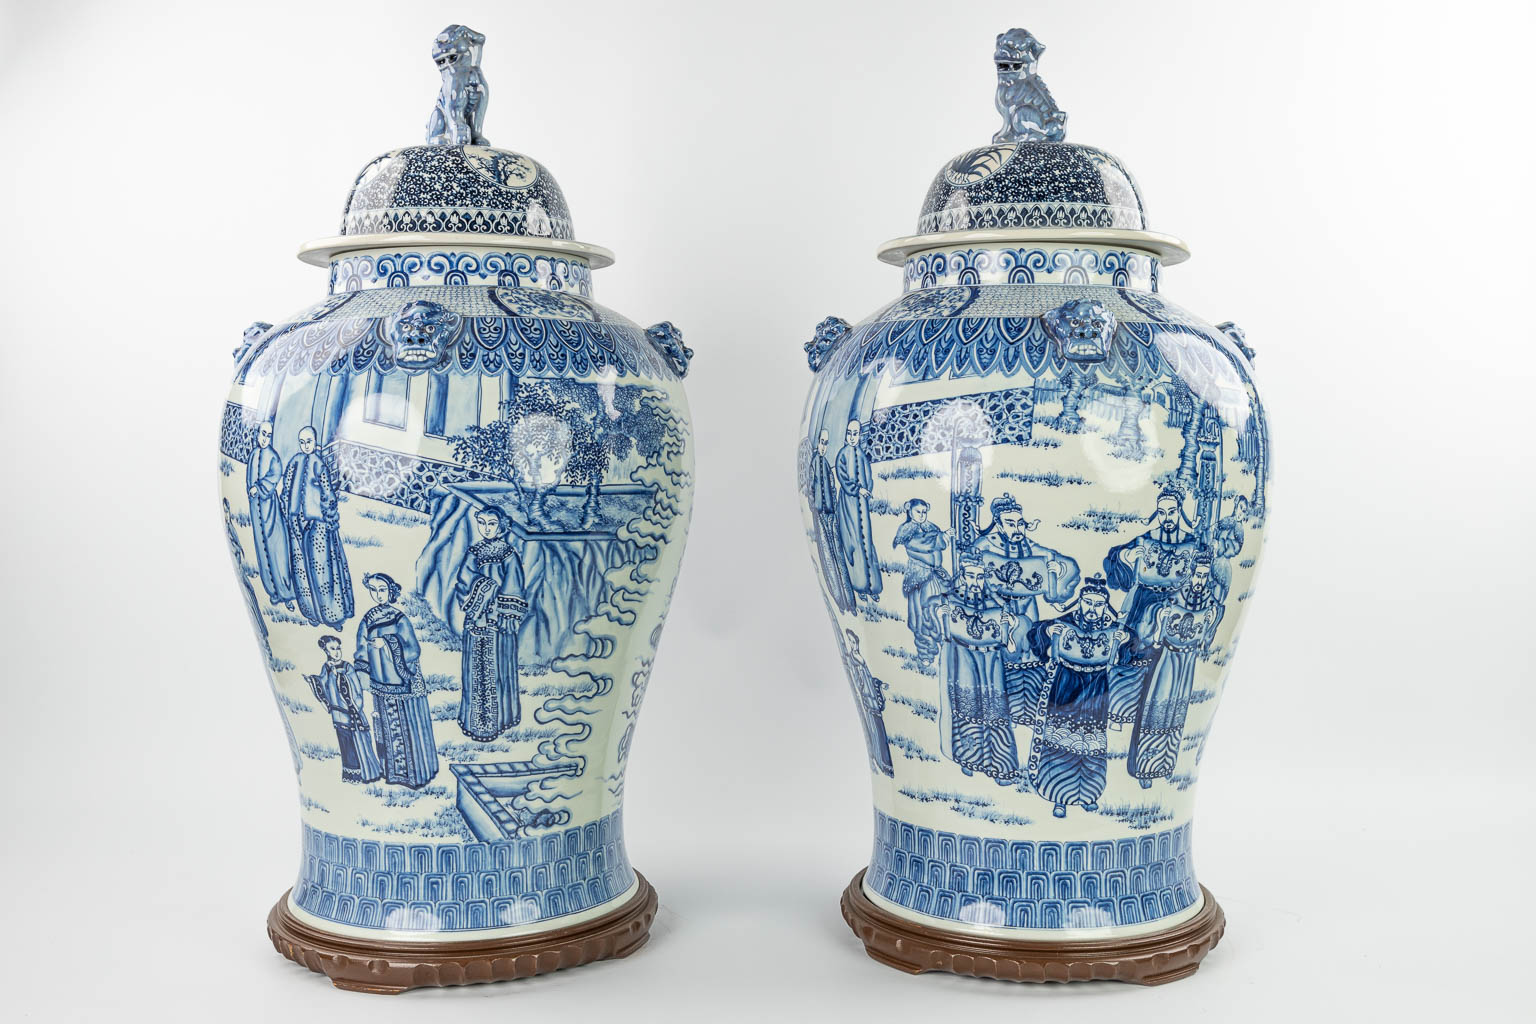 A pair of large Chinese vases with lid, made of blue-white porcelain with the emperor, dragons and w - Image 12 of 15